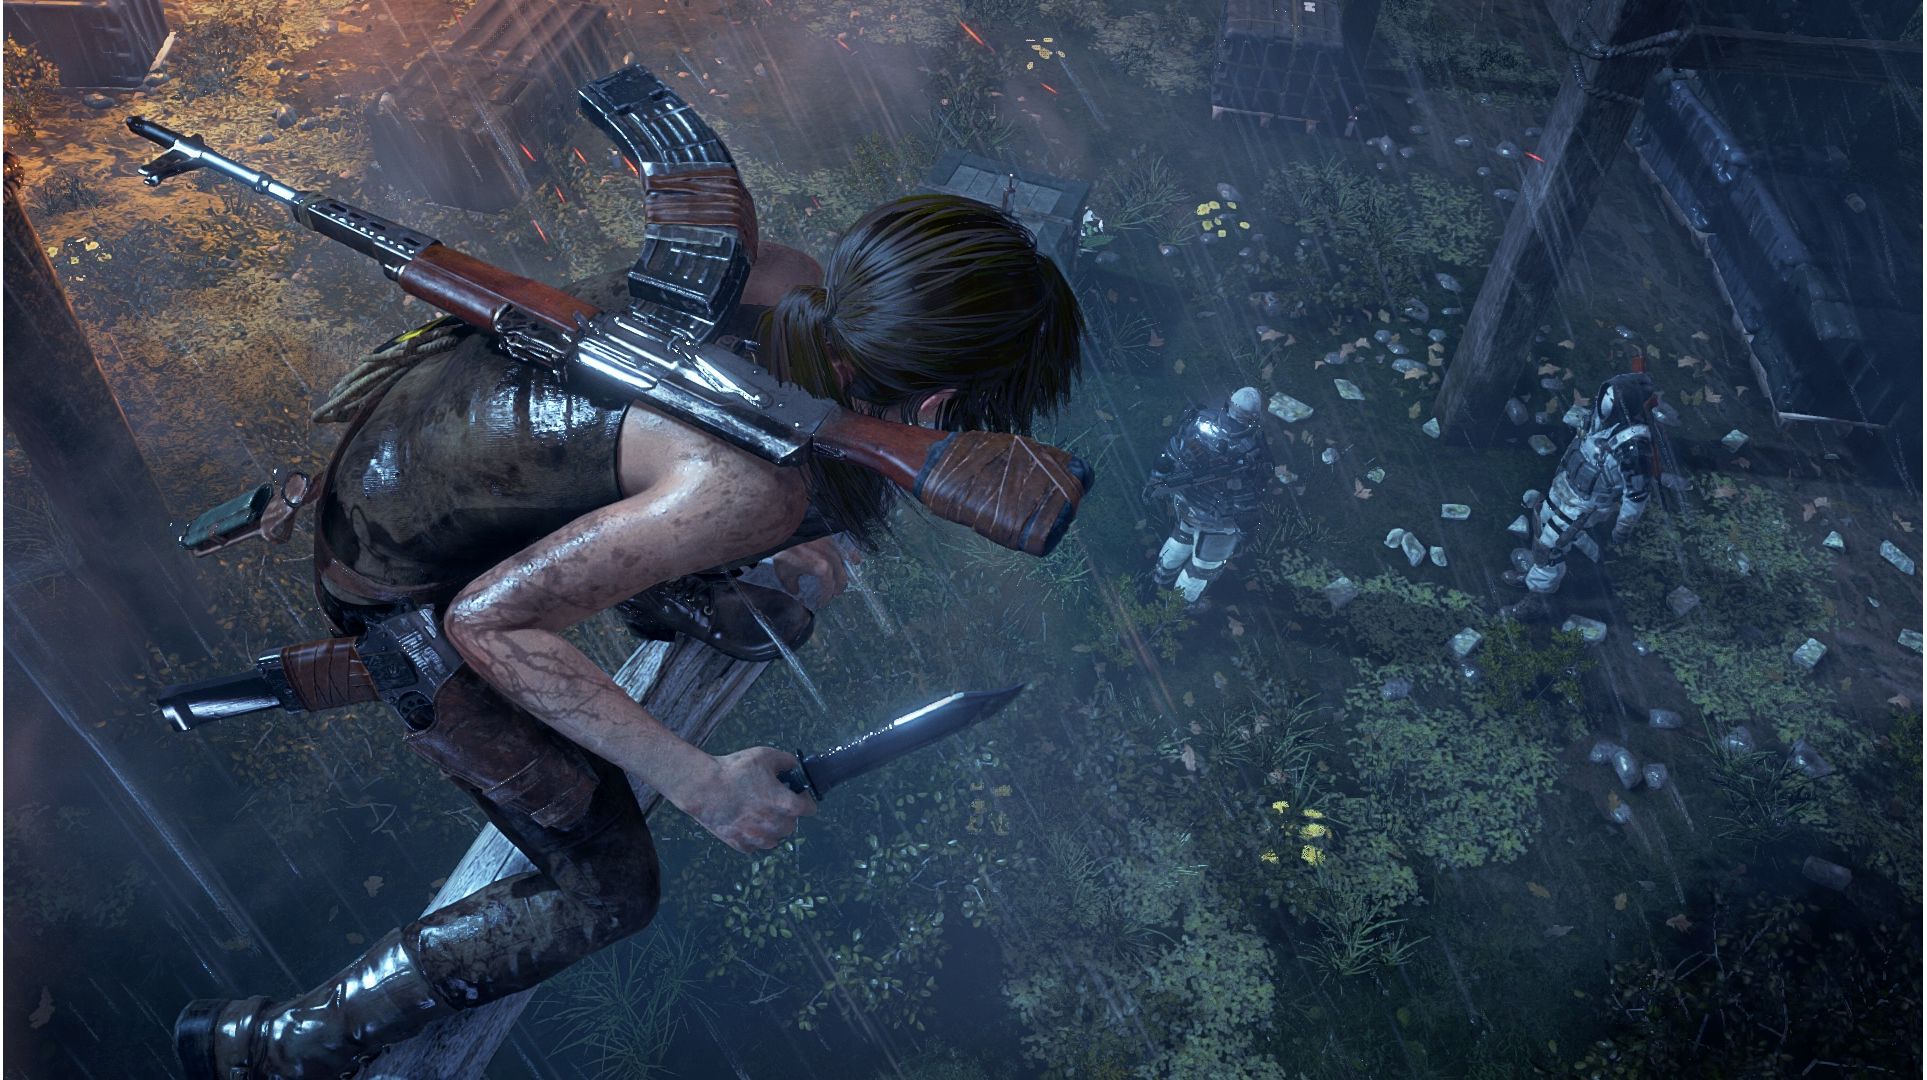 Buy Rise of the Tomb Raider: 20 Year Celebration from the Humble Store and  save 80%